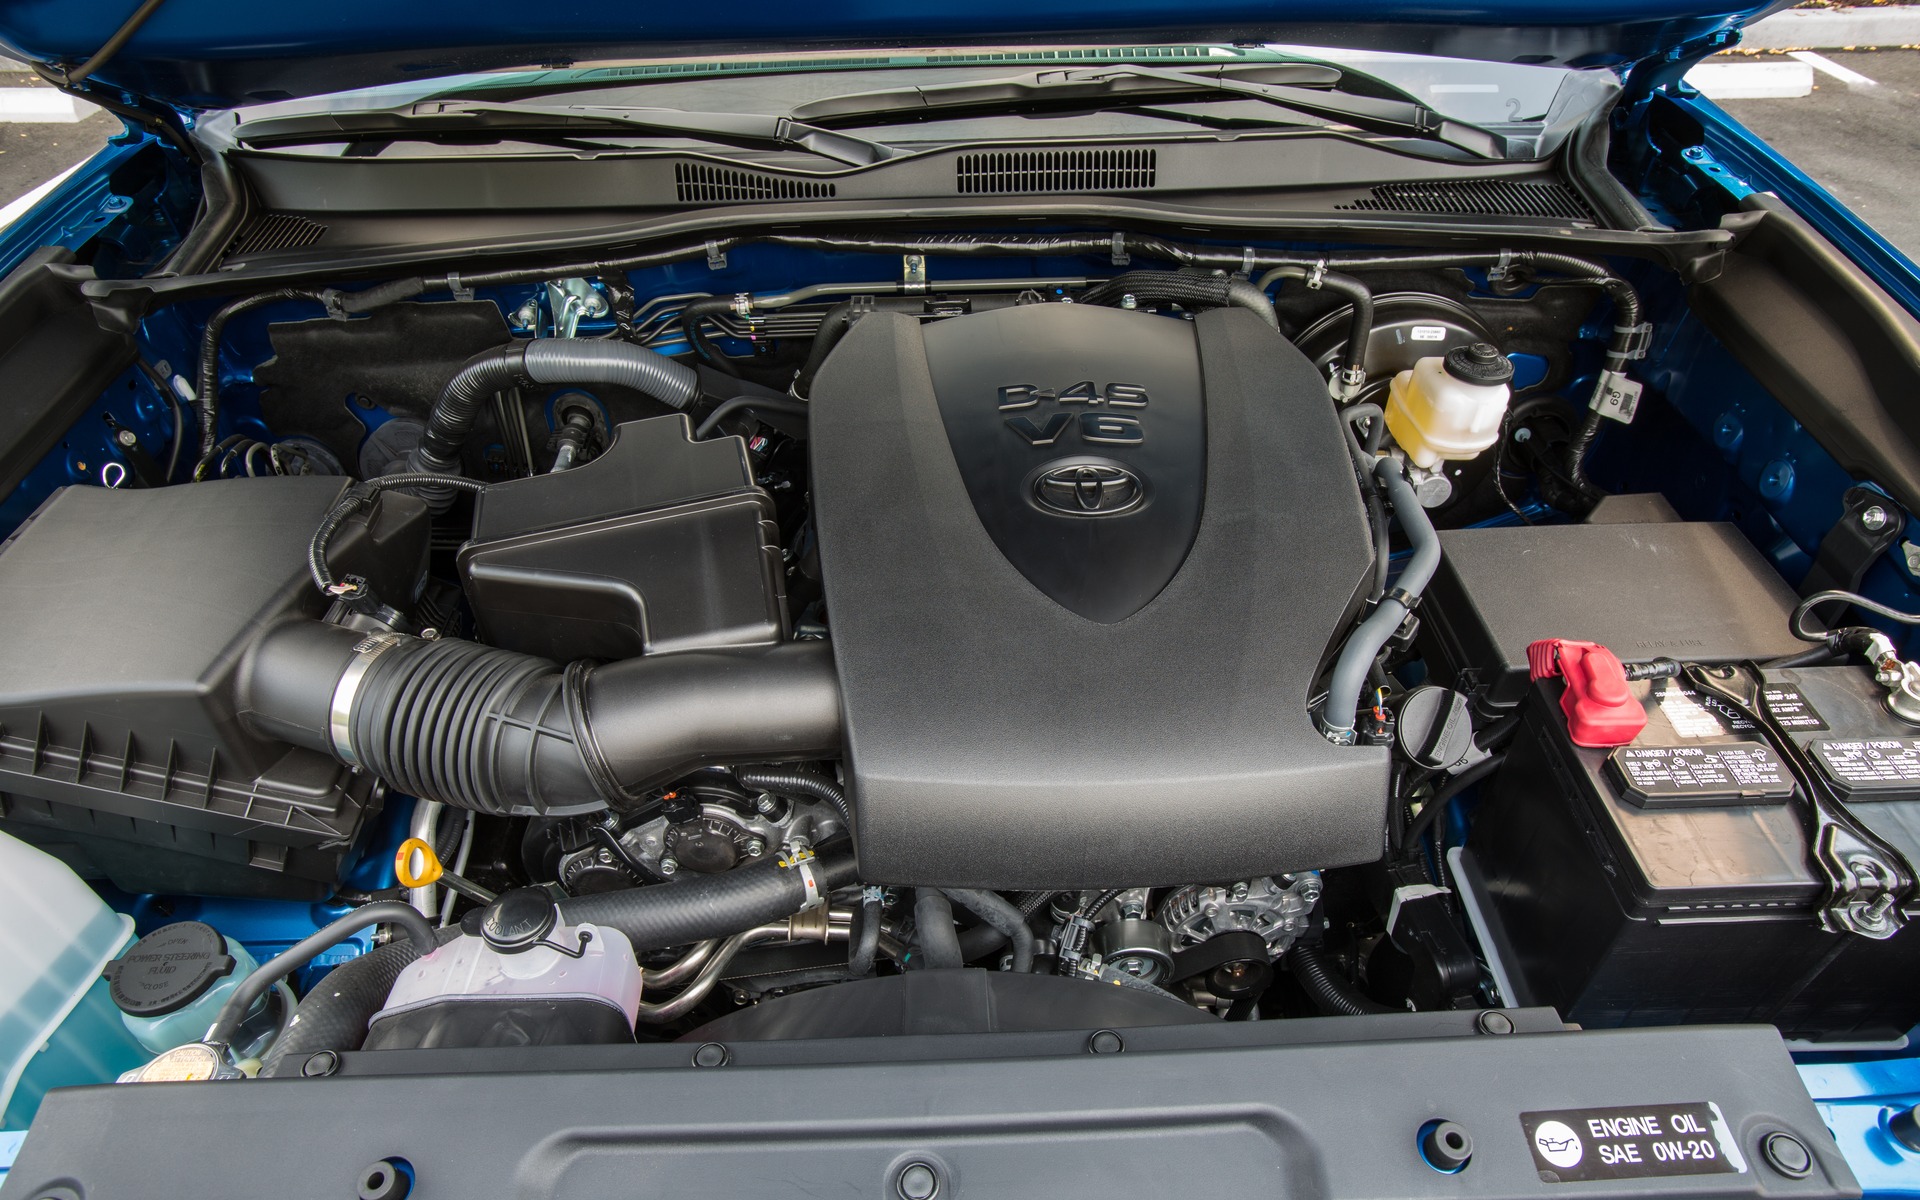 The 3.5-litre, Atkinson-cycle V6 engine in the 2016 Toyota Tacoma